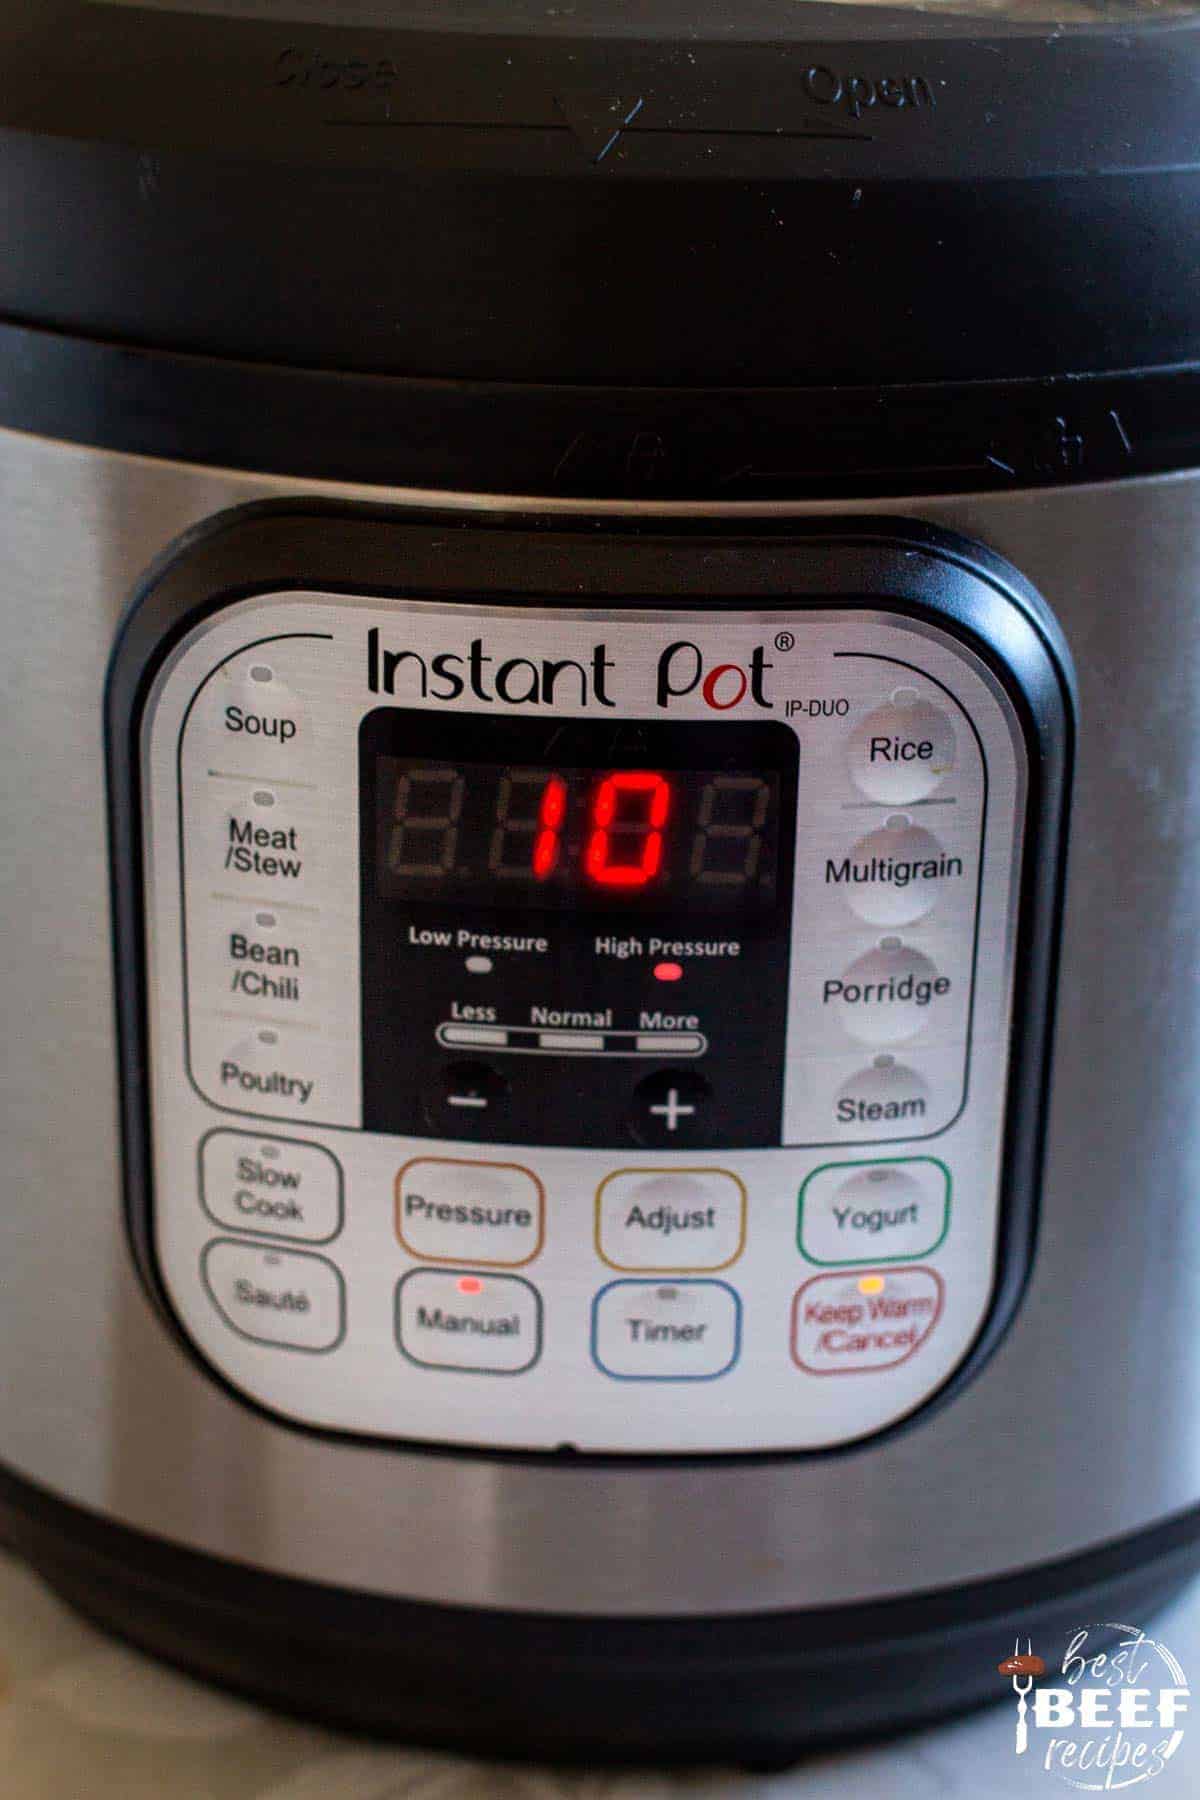 Close up of the time set on the instant pot